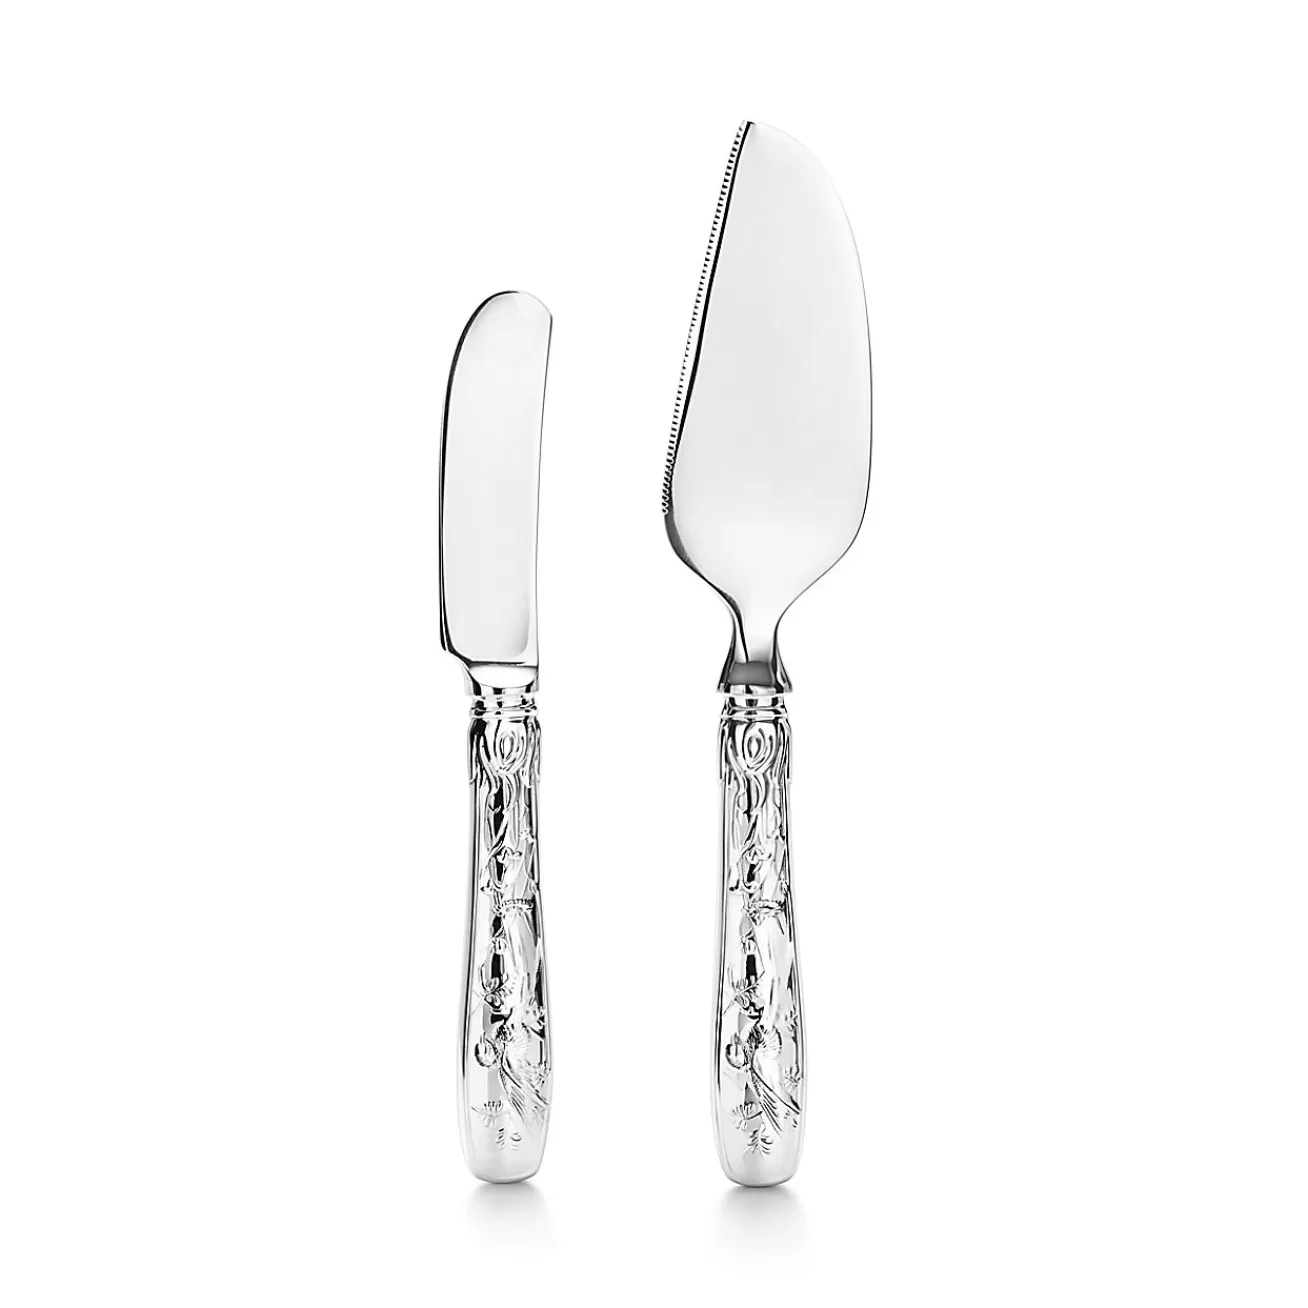 Tiffany & Co. Tiffany Jardin cheese knife and server in sterling silver. | ^ The Couple | Wedding Gifts